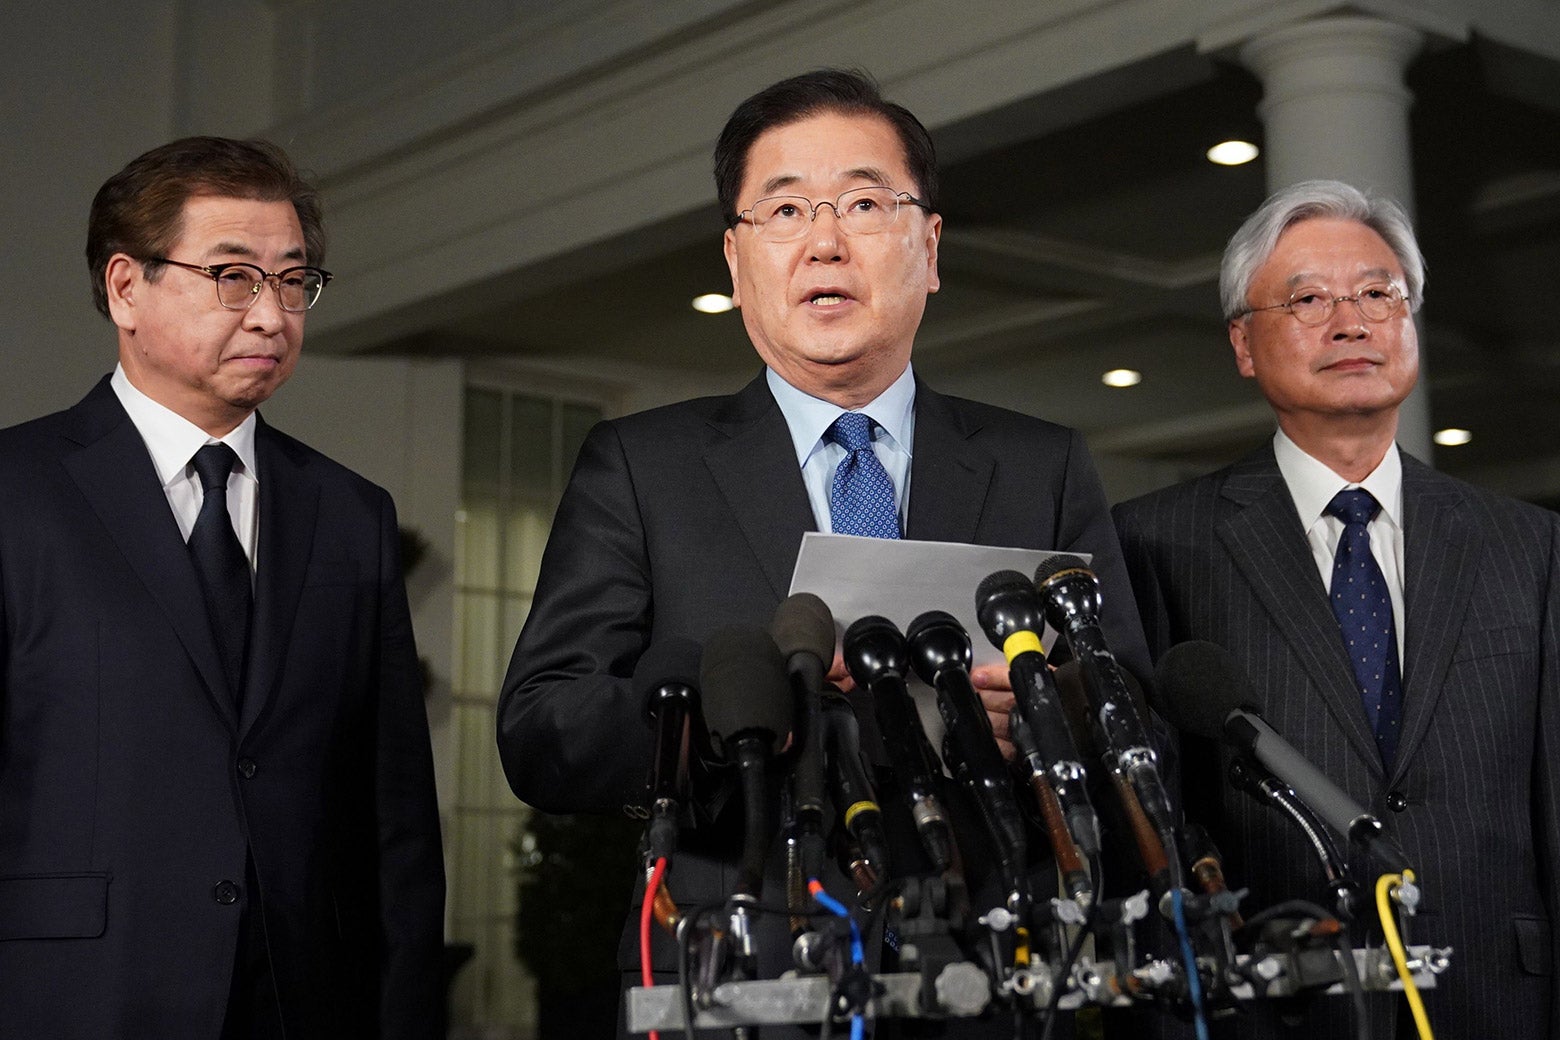 South Korean National Security Advisor Chung Eui-yong (C), flanked by South Korea National Intelligence Service chief Suh Hoon (L) and South Korea's ambassador to the United States Cho Yoon-je (R), briefs reporters outside the West Wing of the White House on Mar. 8, 2018 in Washington, DC, announcing North Korean leader Kim Jong Un has offered to meet US President Donald Trump.